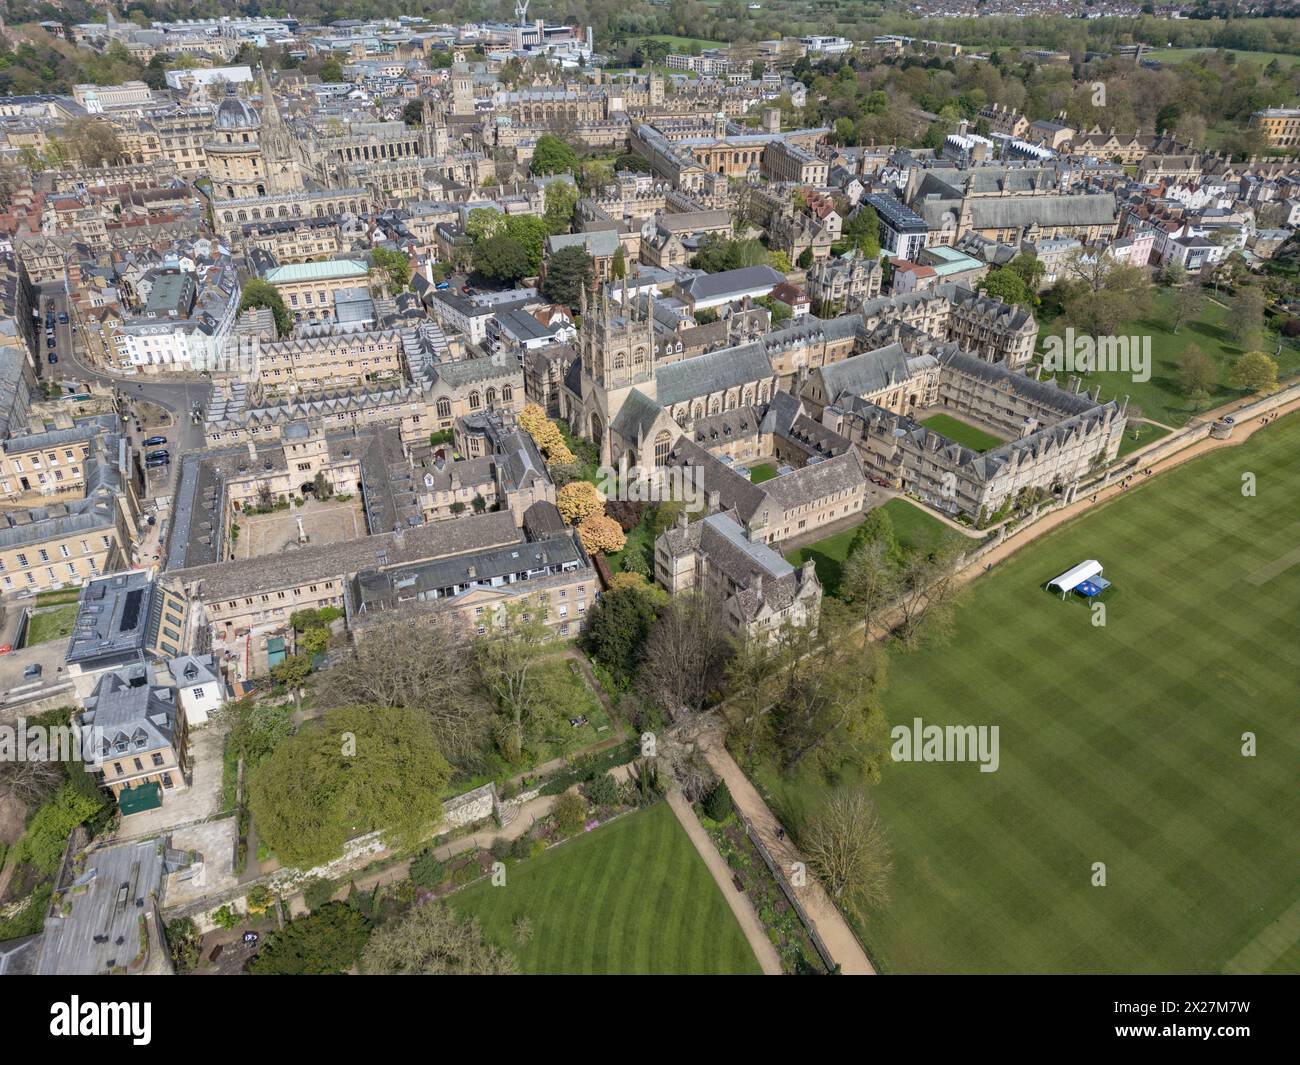 Aerial view of Merton College, University of Oxford, Oxford, UK. Stock Photo